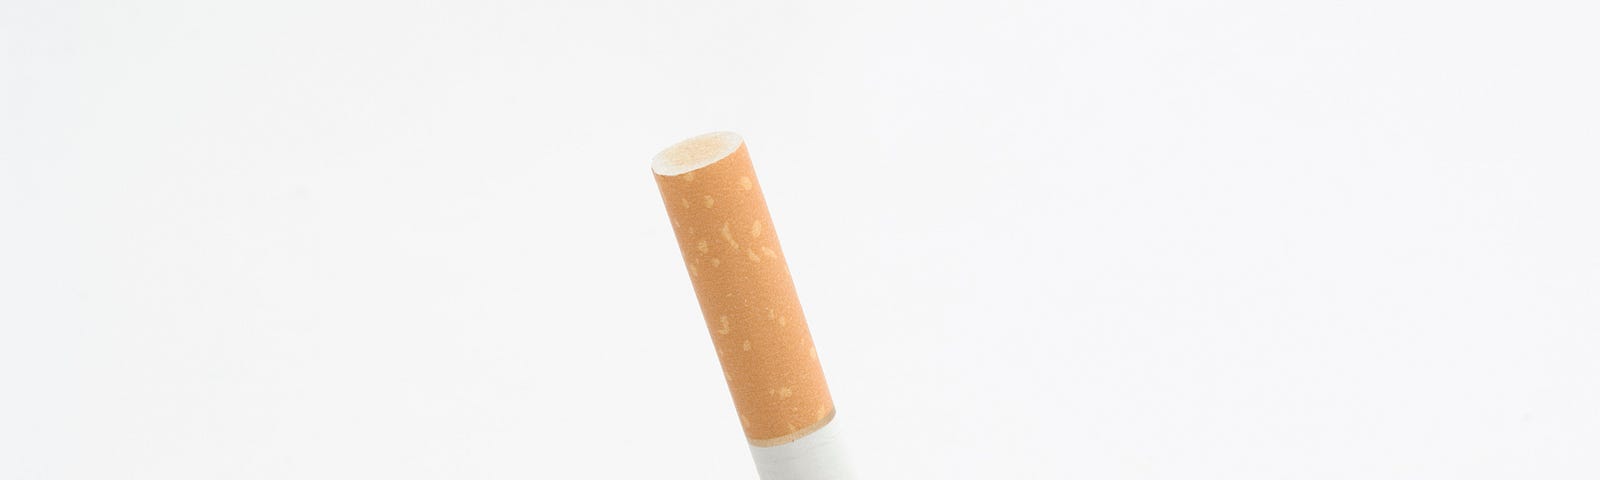 a cigarette being stubbed out into a pile of ash on a white background